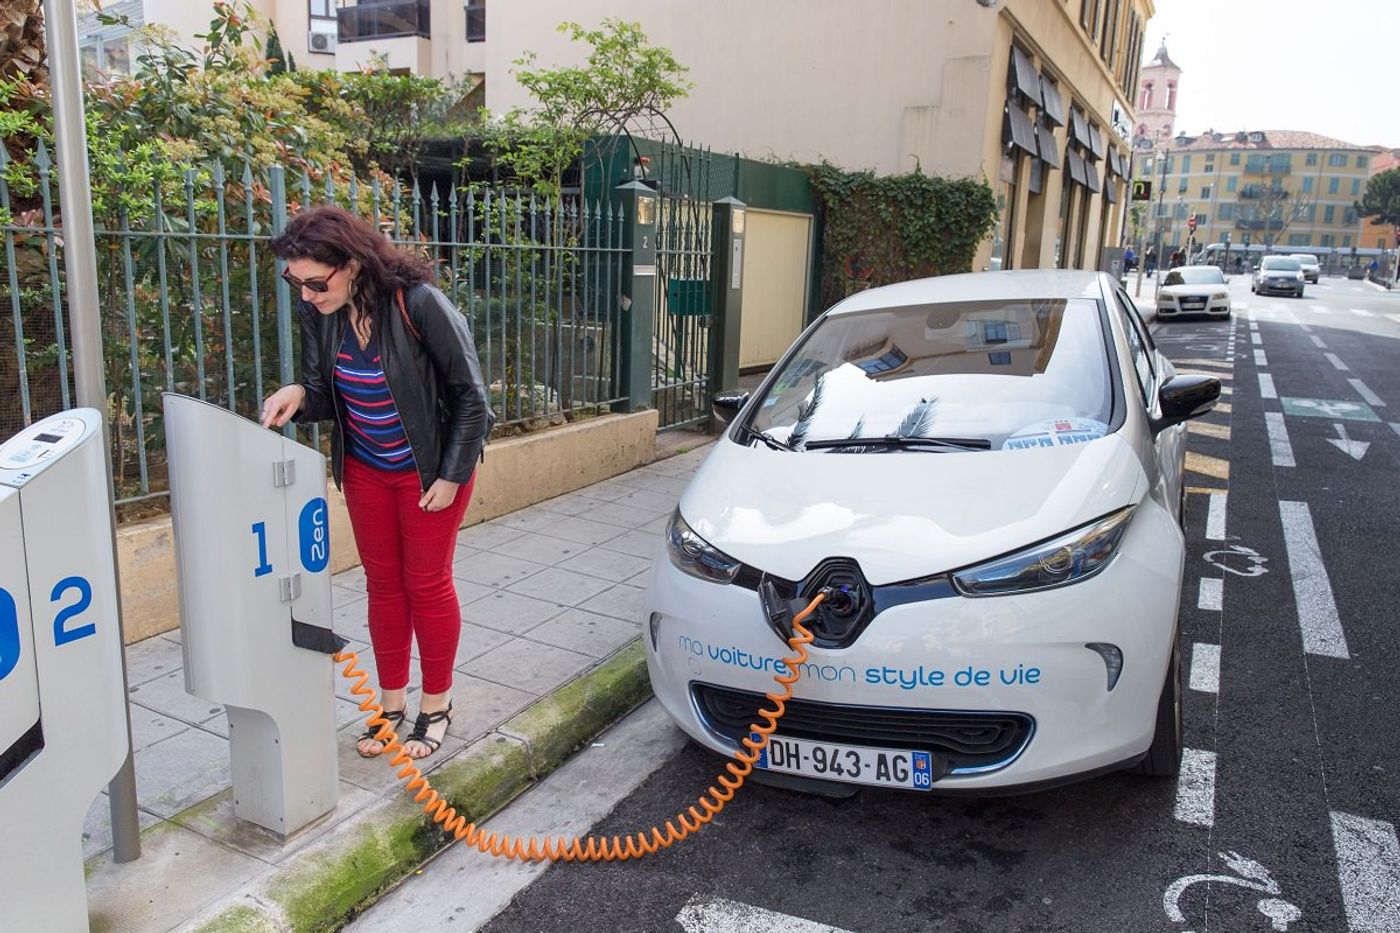 People are getting more and more excited about EVs. Photo: Icebike.org